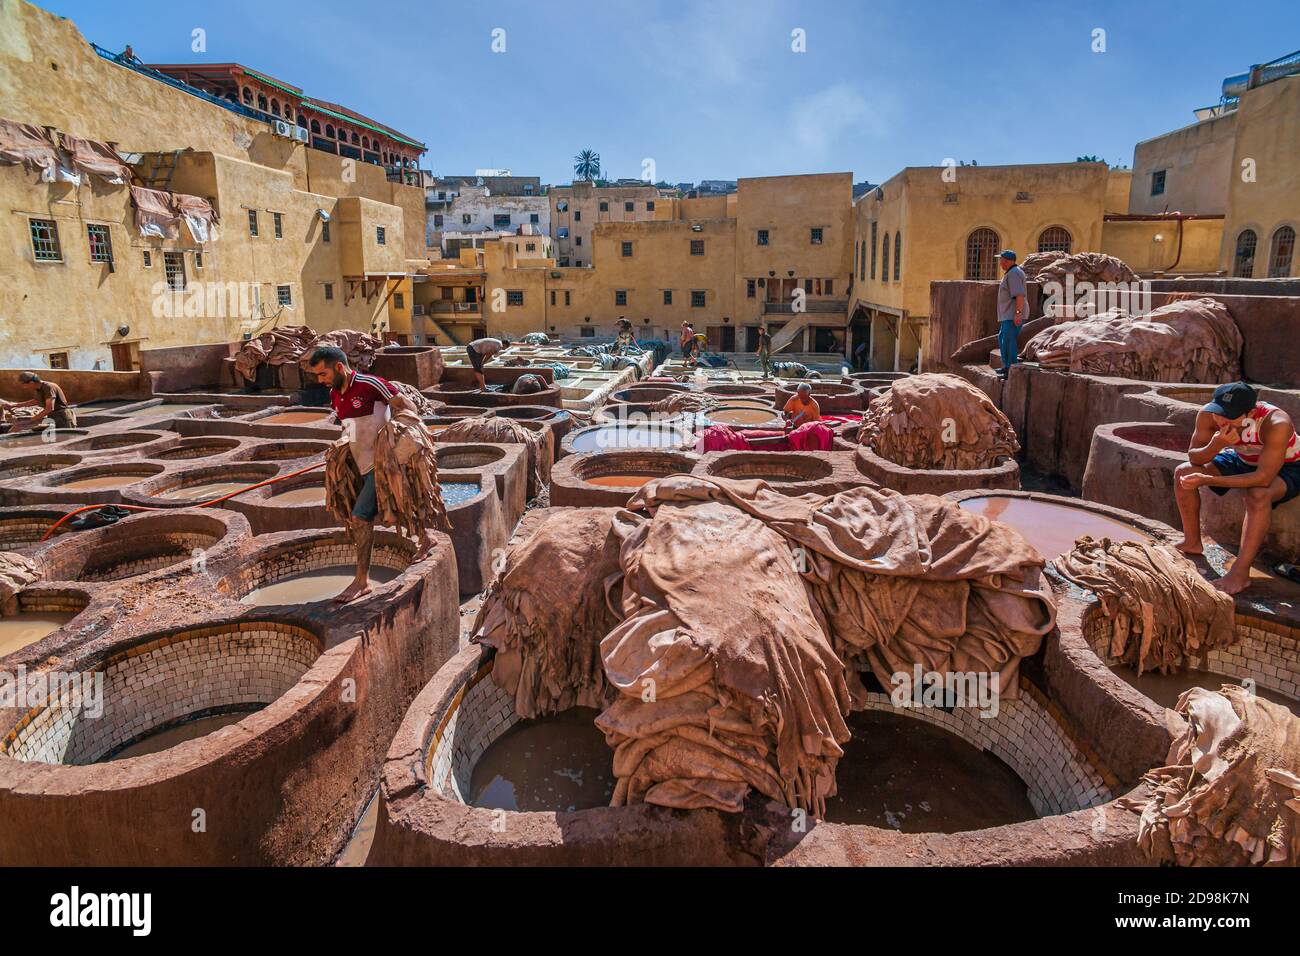 Chouara Tannery is one of the three tanneries in the city of Fez, Morocco. It is the largest tannery in the city and one of the oldest. Stock Photo